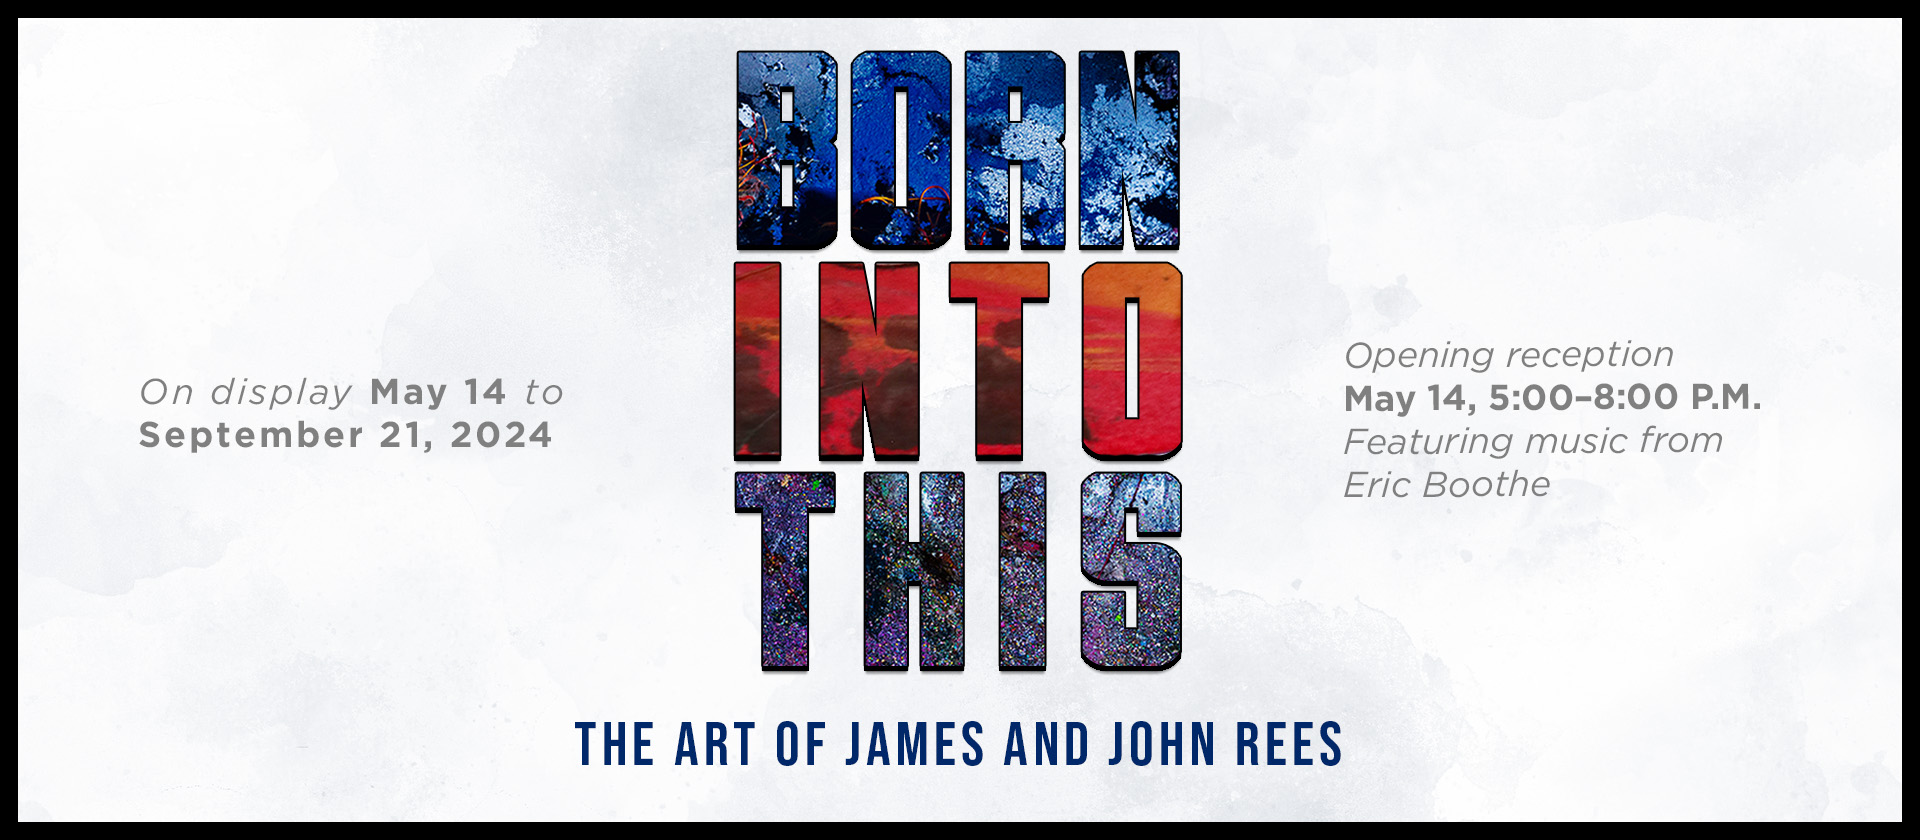 Born Into This, The Art of James and John Rees | On display May 14 - Sept. 21, 2024 | Opening reception May 14, 5:00-8:00 P.M. featuring music from Eric Boothe